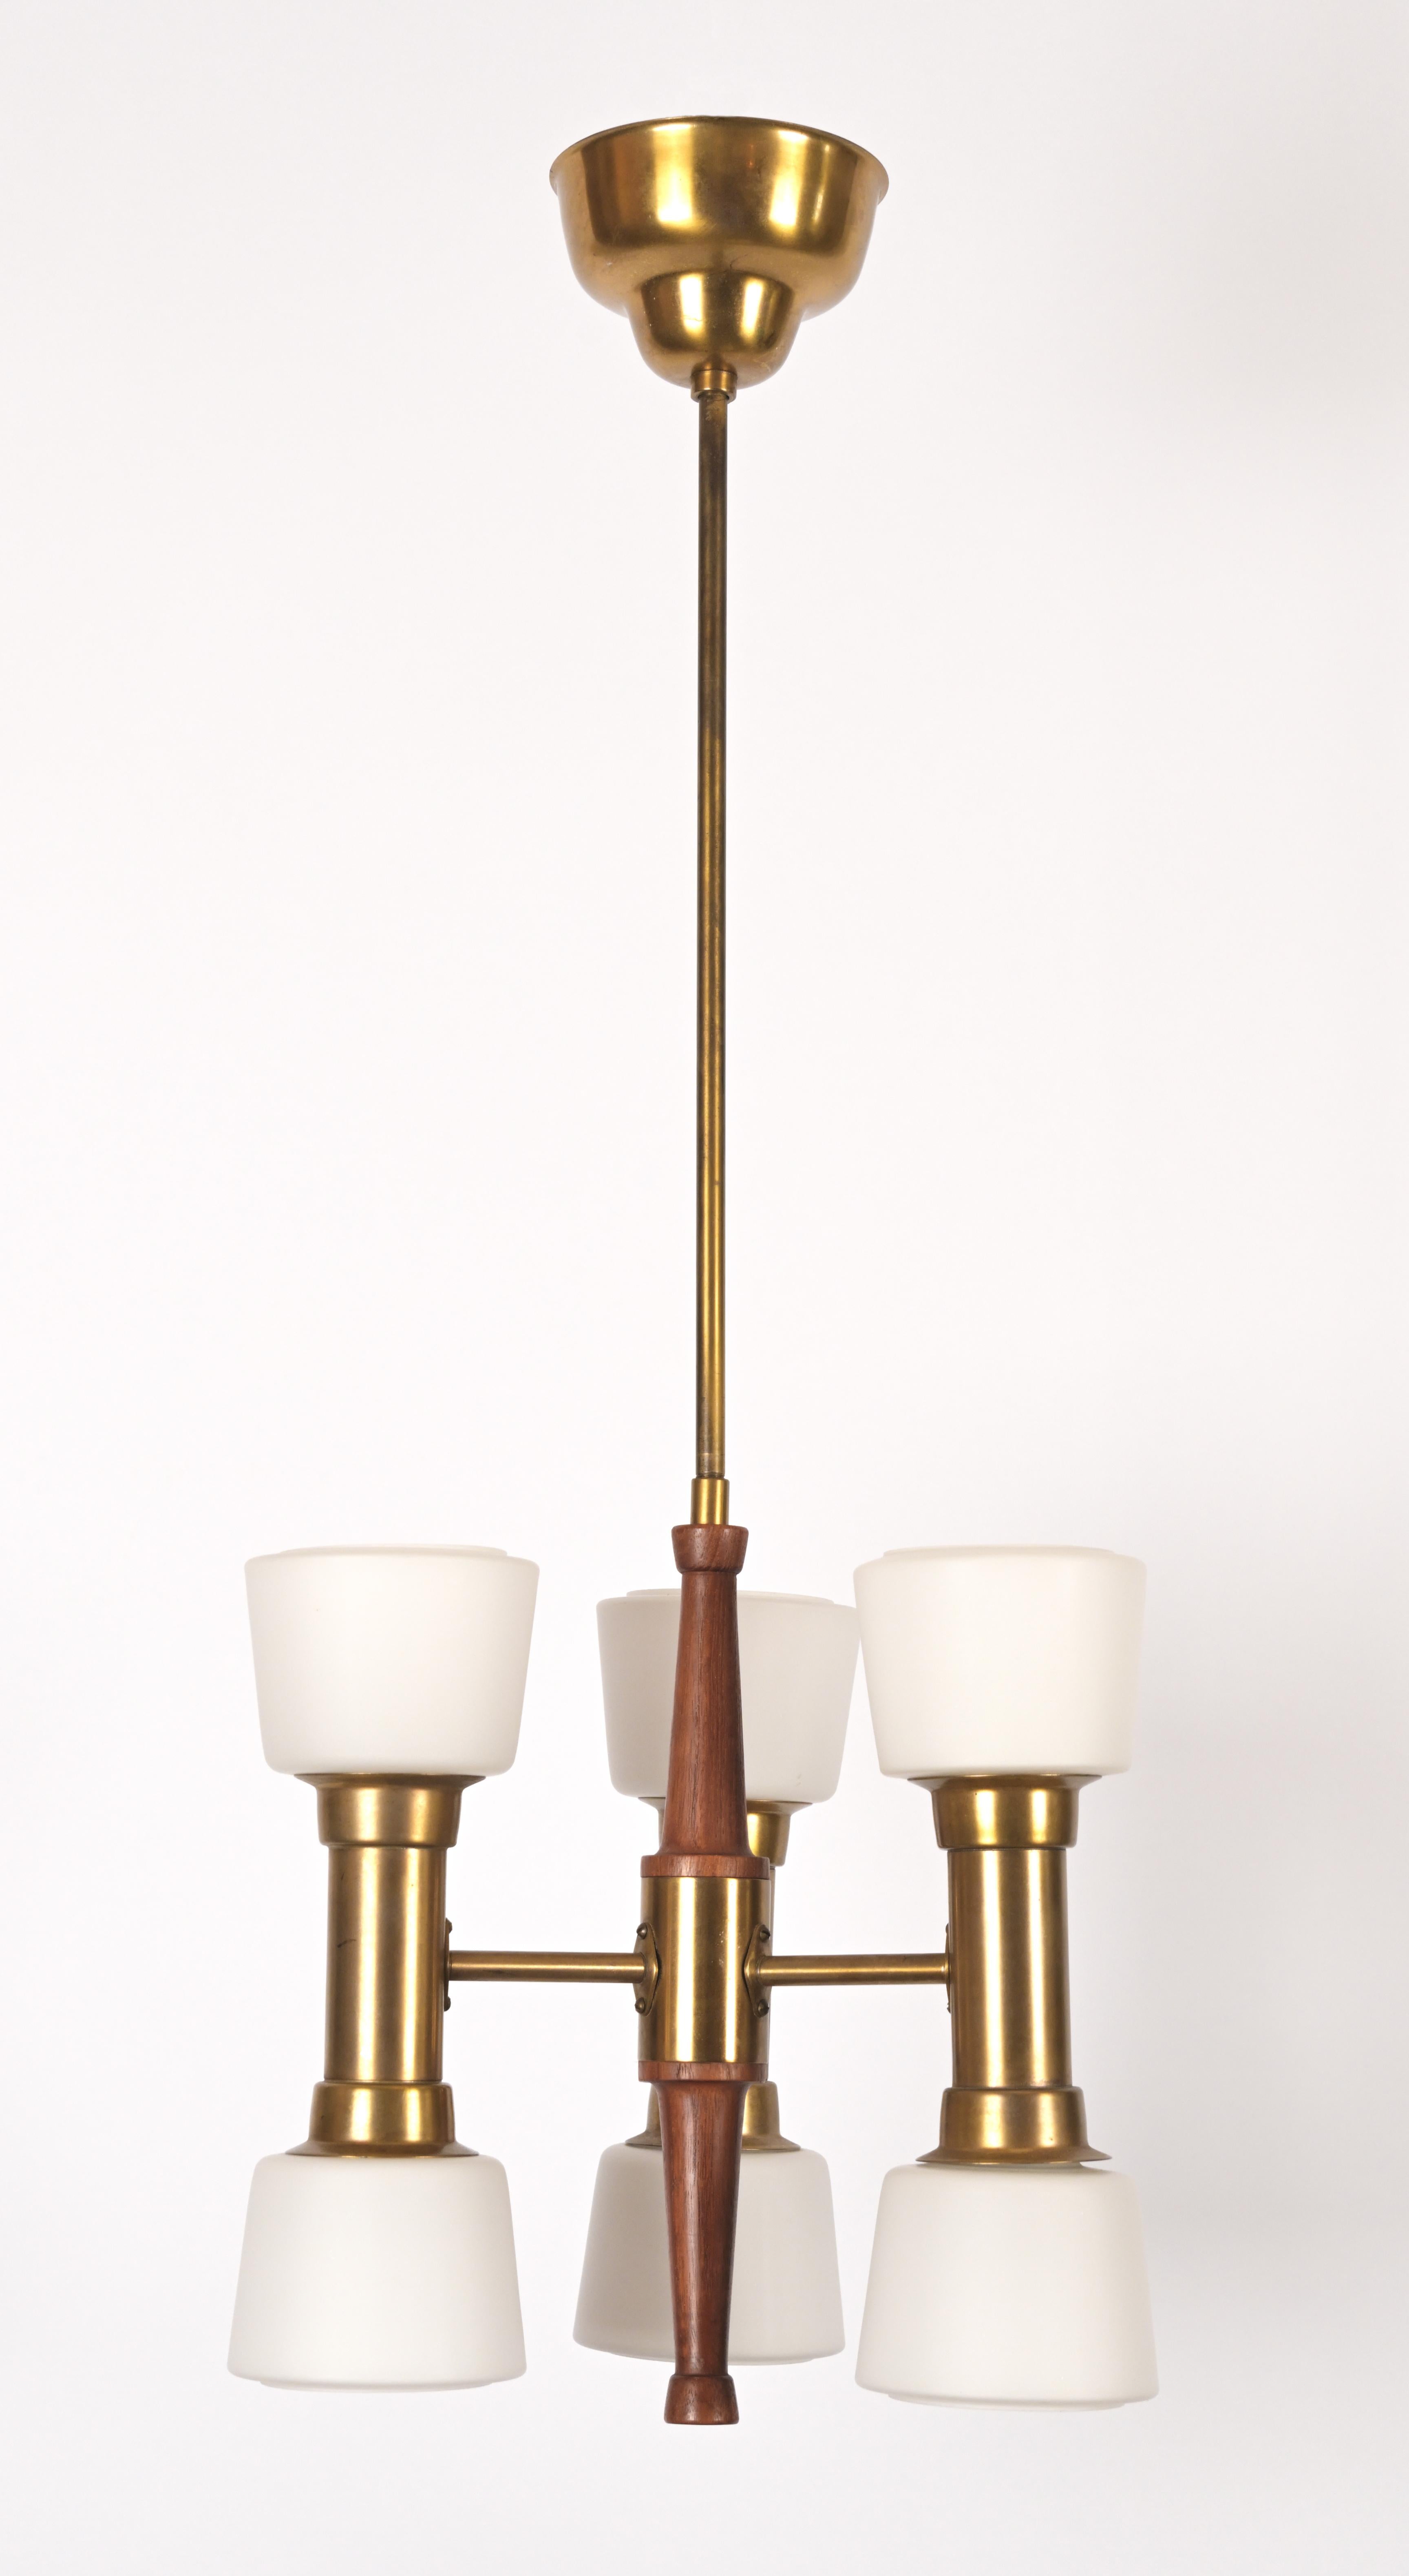 Teak and opal glass pendant light made by Swedish designer Bo Notini (1910-1975) with brass extensions . Contains six sockets. Maximum 40 wattage.